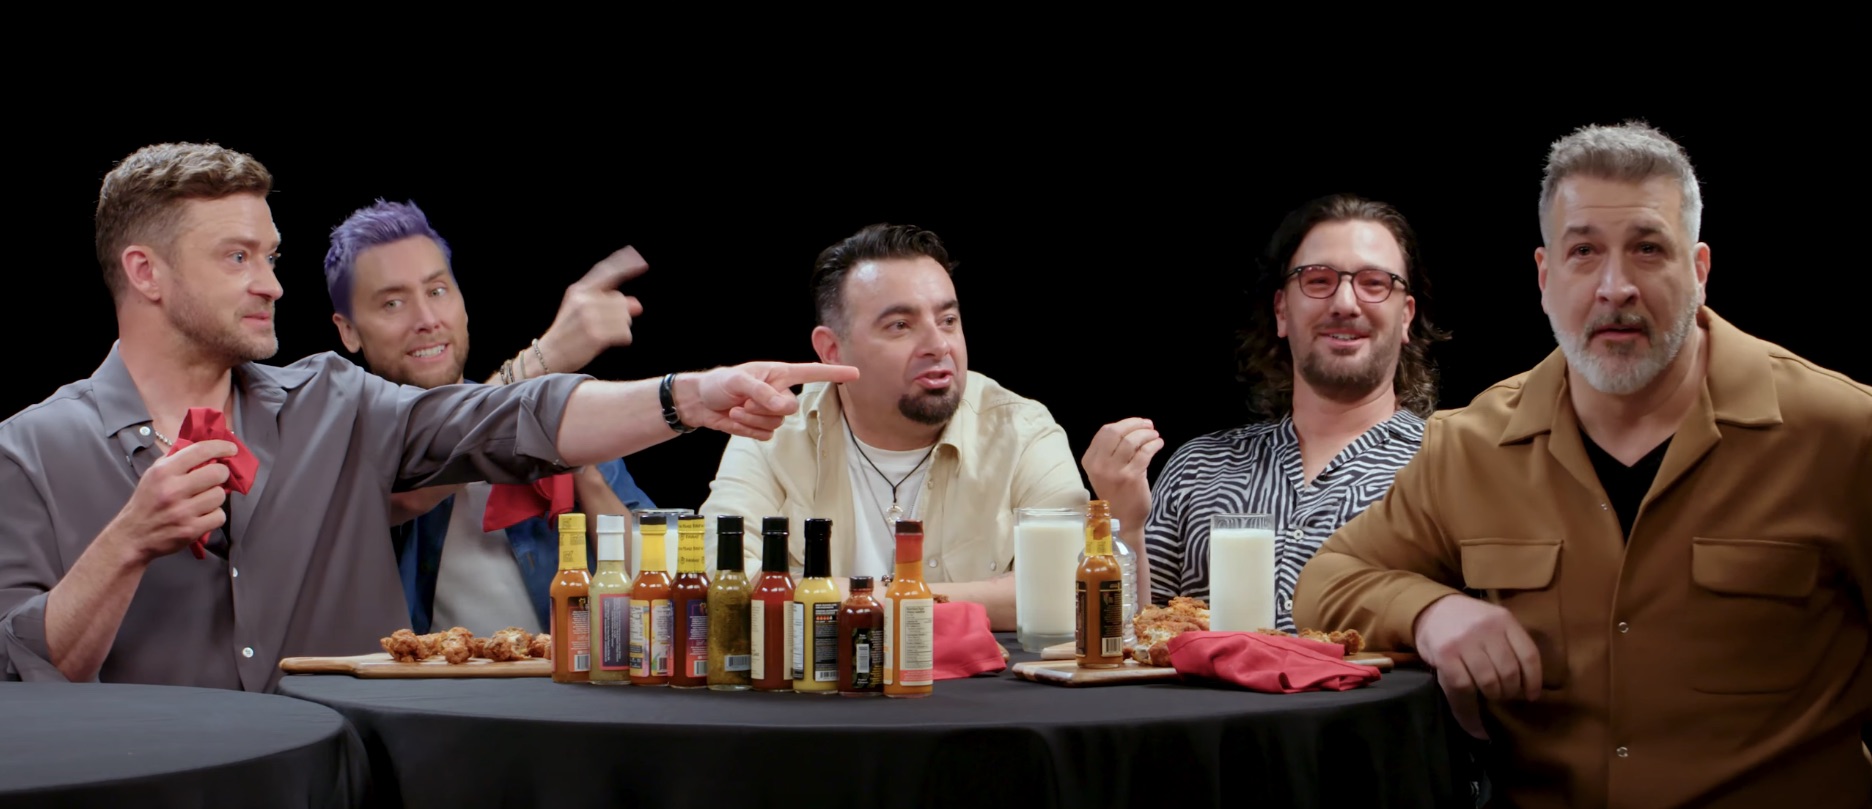 NSYNC Turn Up the Heat on ‘Hot Ones’ / Dish on New Reunion Single ‘Better Place’